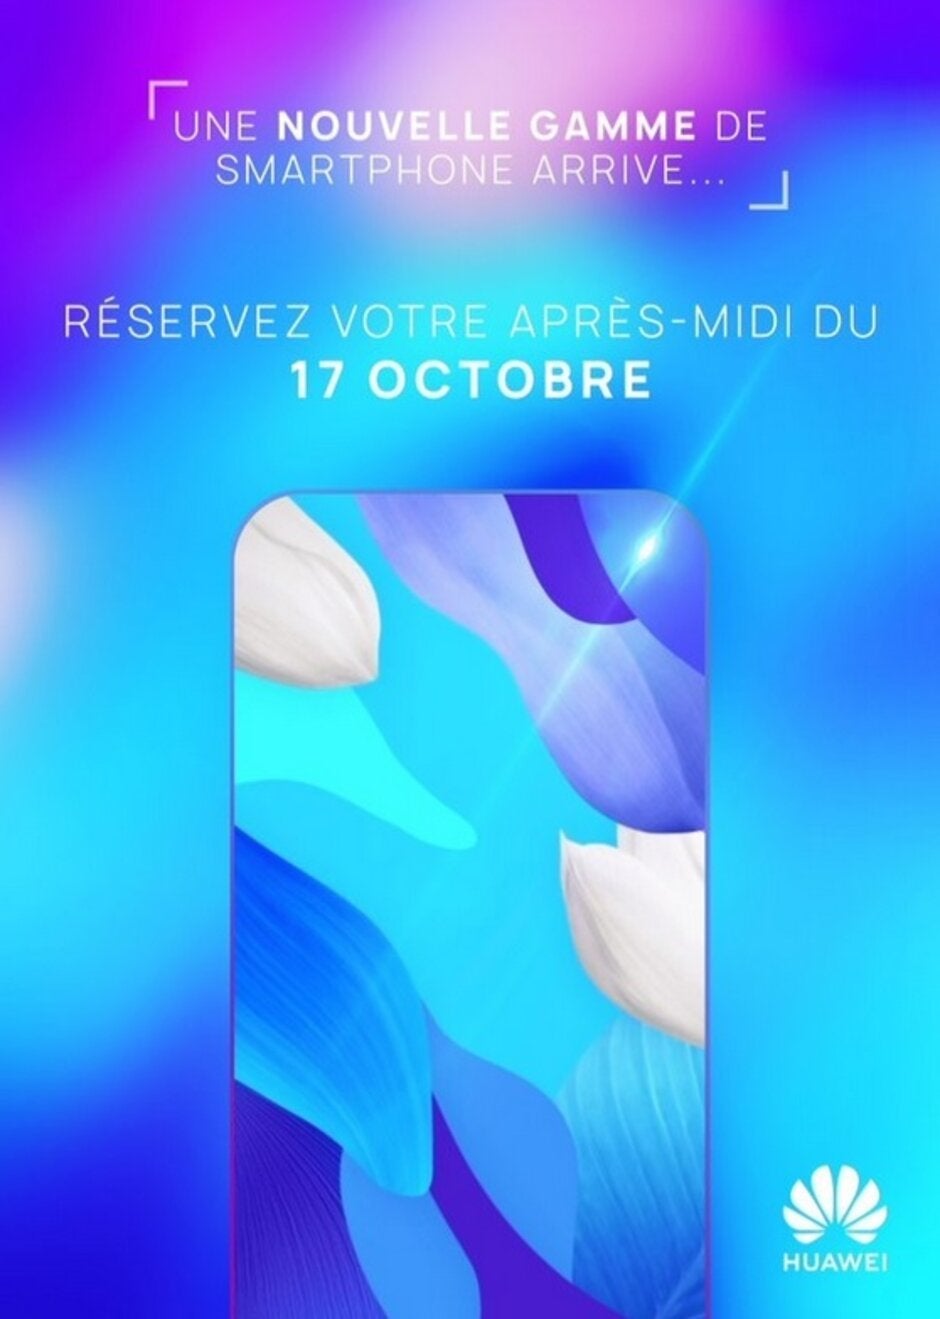 Huawei teases the introduction of an all-screen phone in France on October 17th - Teaser reveals that Huawei will unveil an all-screen phone next week